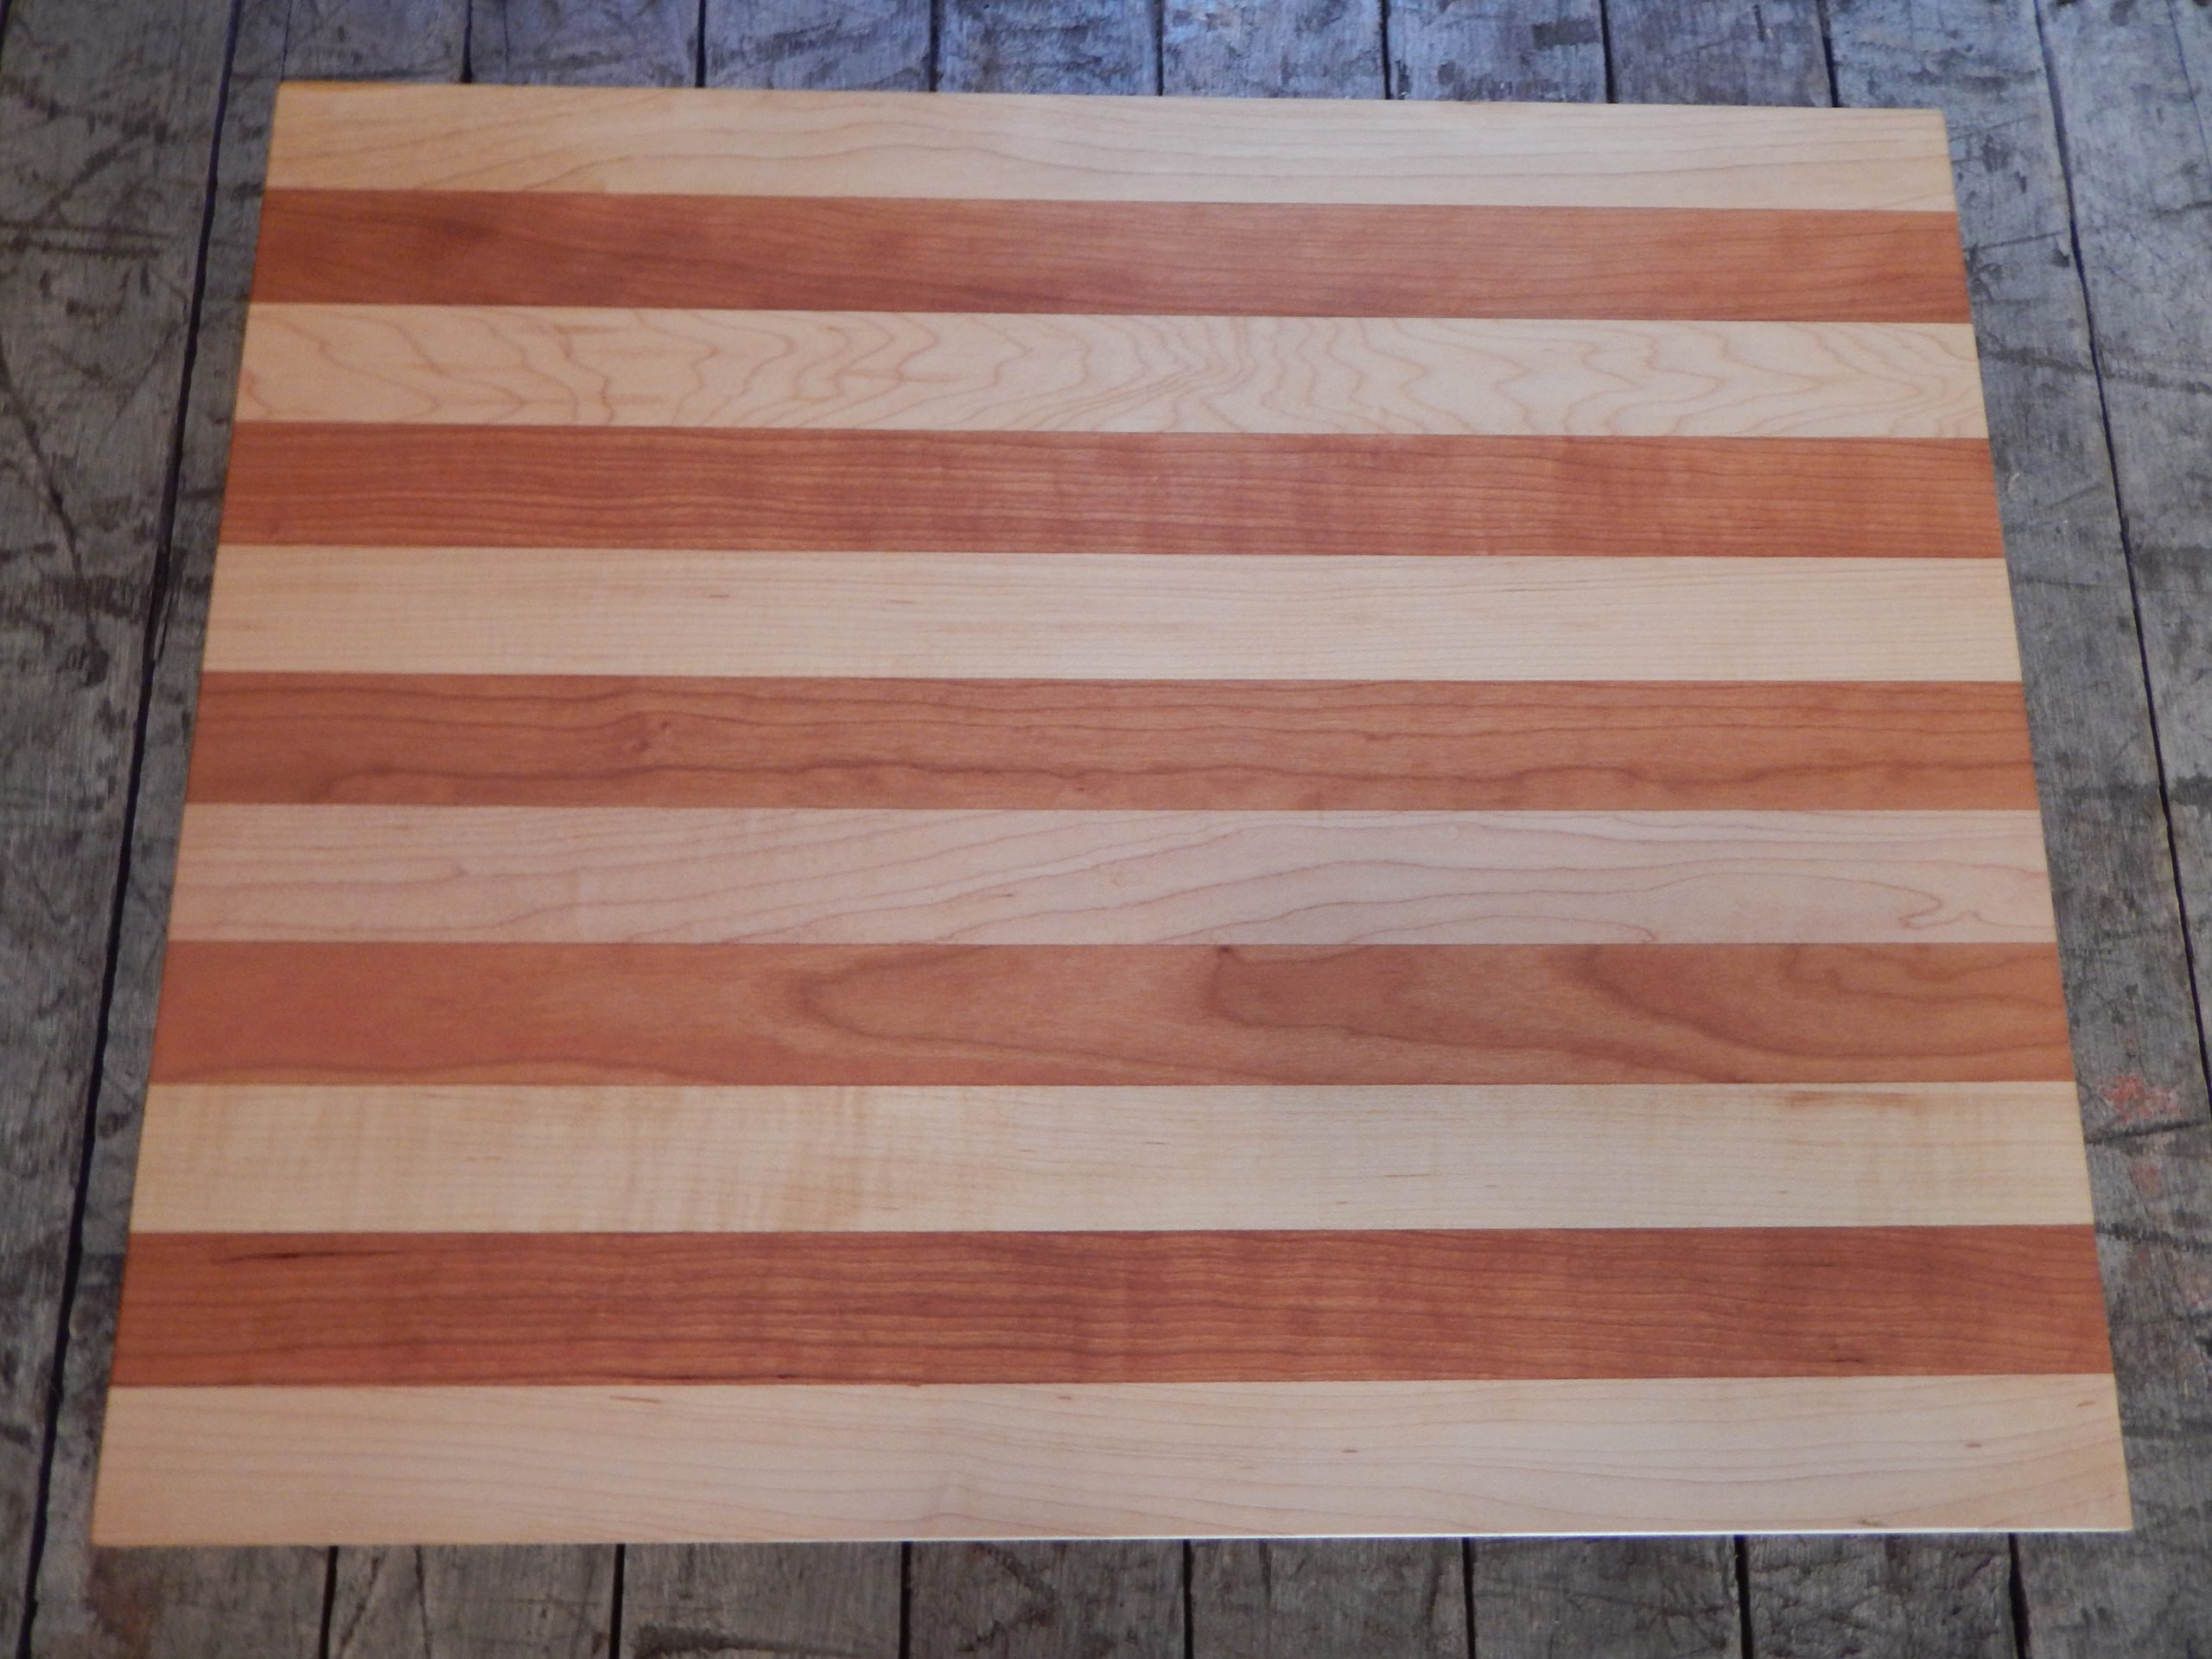 https://www.eastbaycuttingboards.com/wp-content/uploads/2020/09/cherry-maple-flat-scaled.jpg